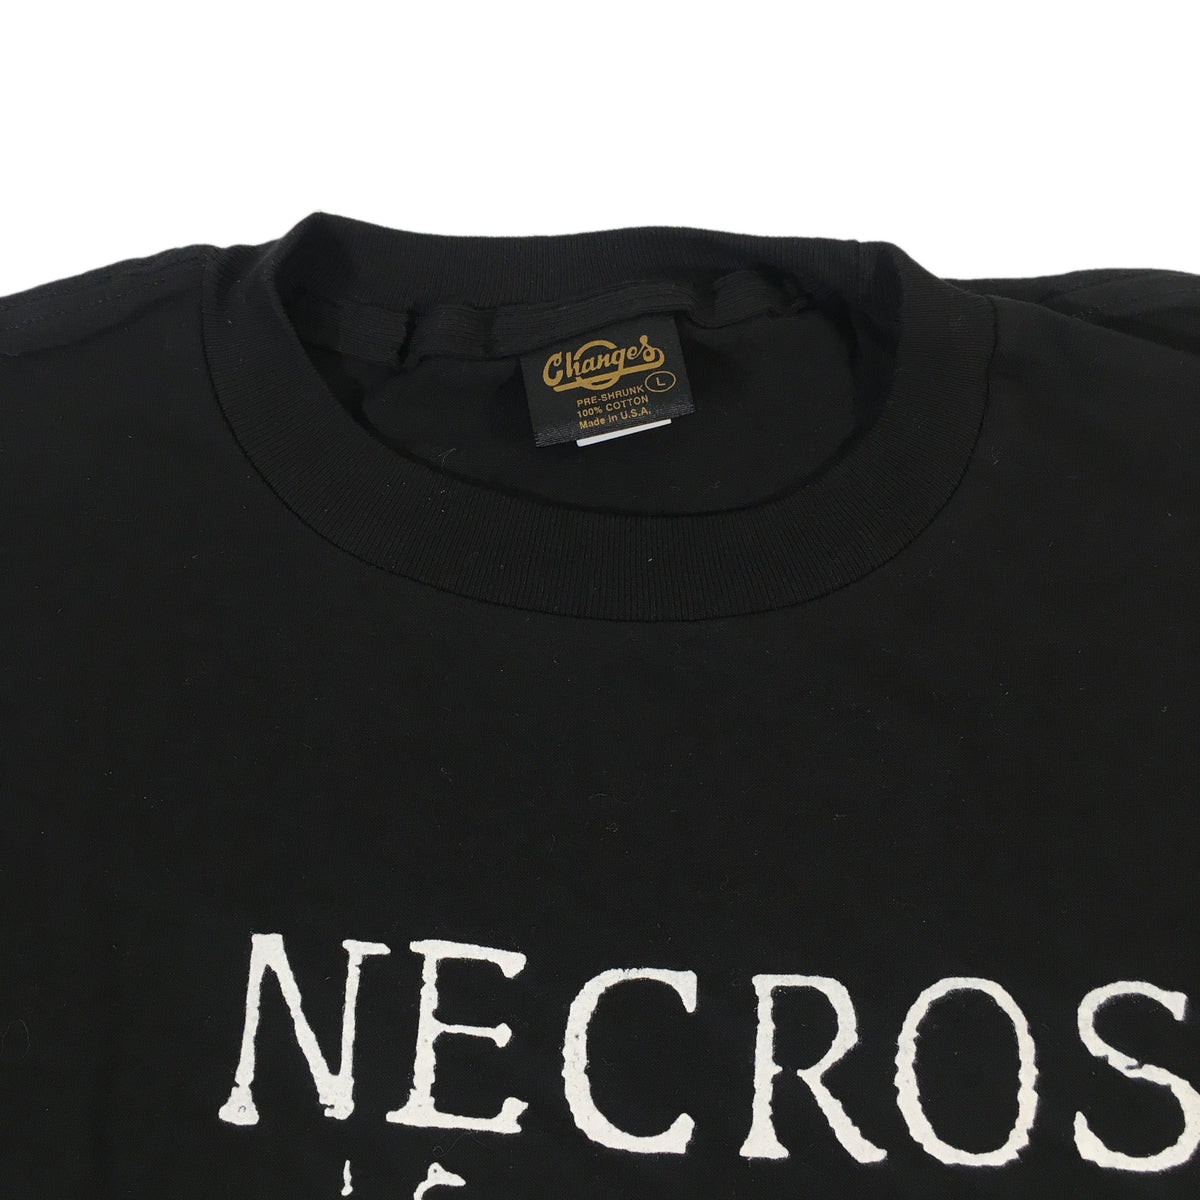 Vintage Necros &quot;Early Days&quot; T-Shirt - jointcustodydc